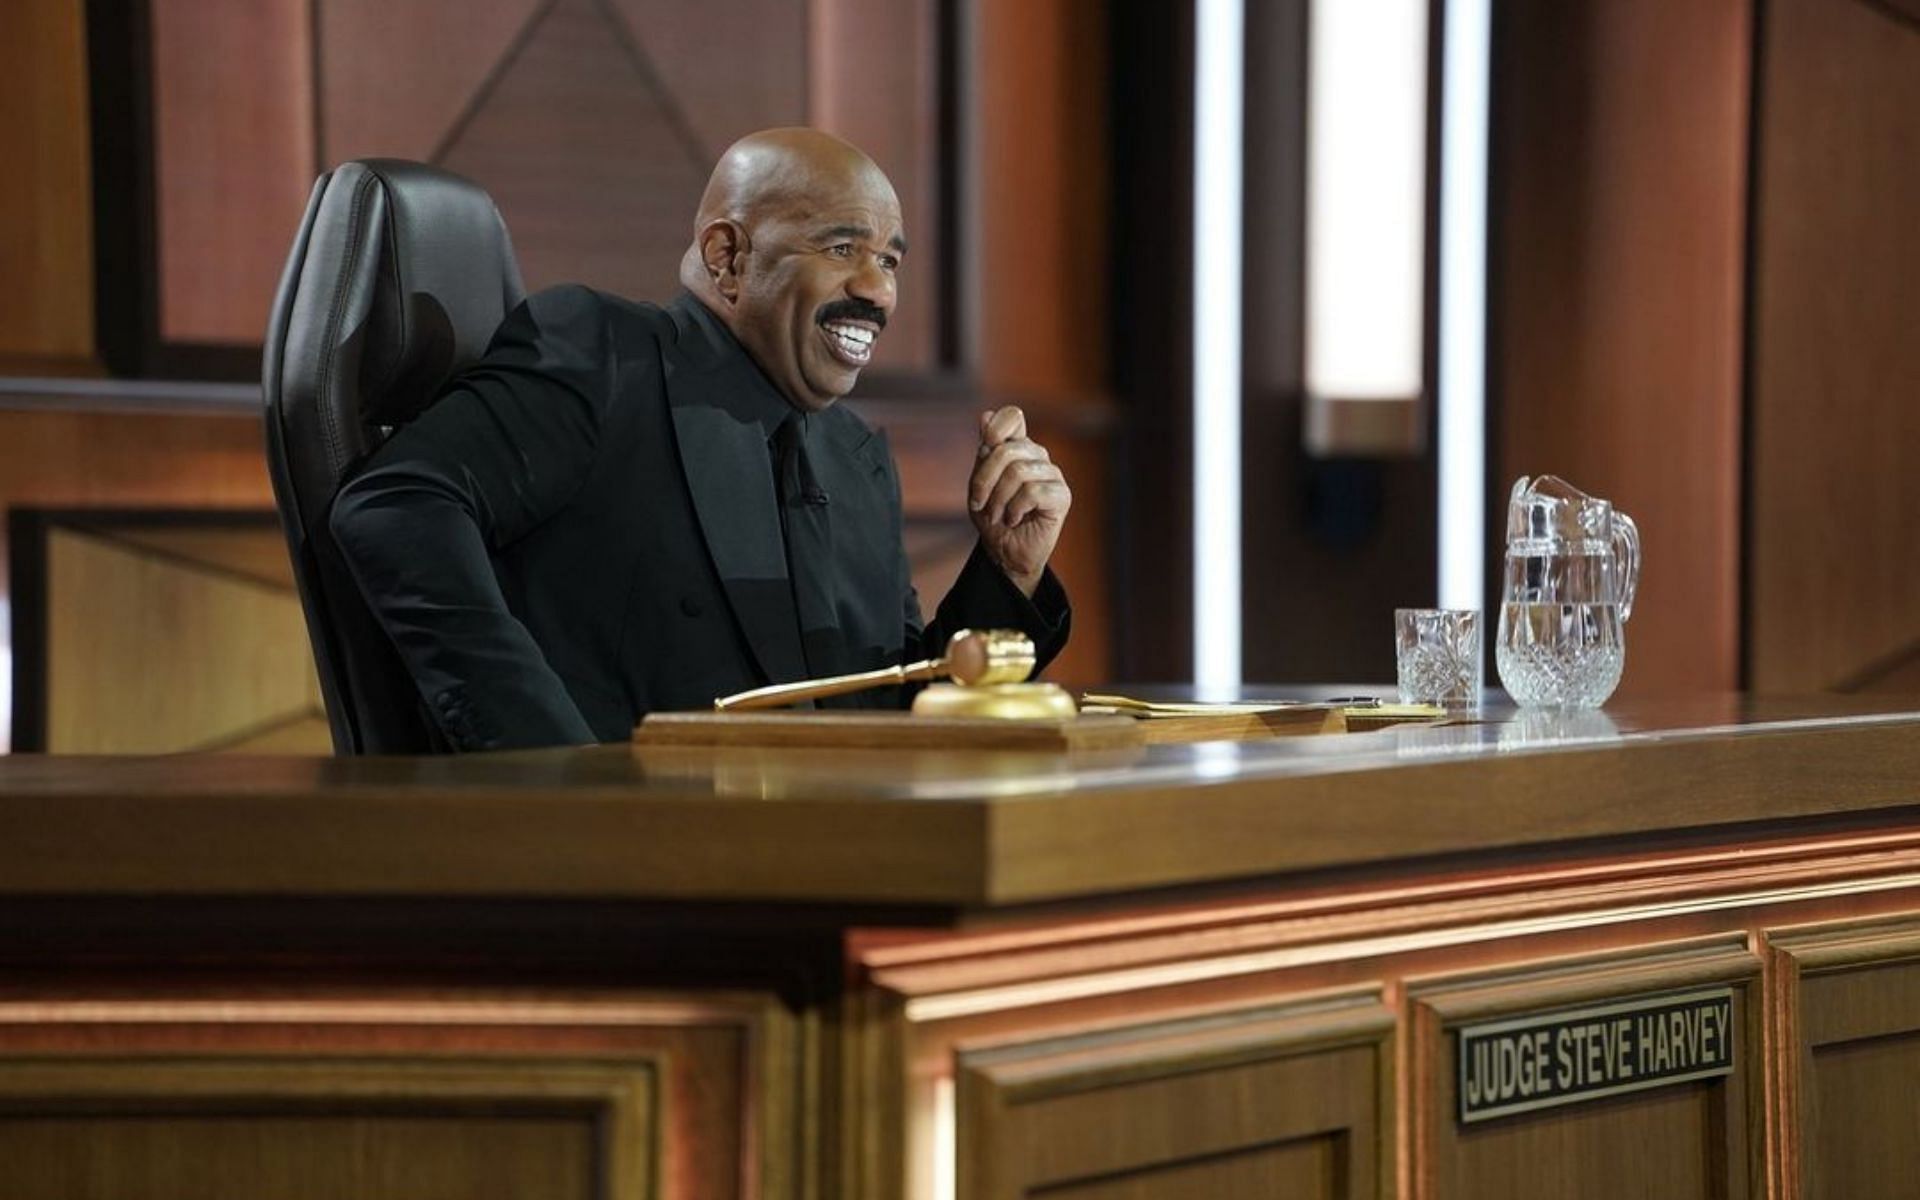 Where to watch ‘Judge Steve Harvey’ episode 1 Release date and more